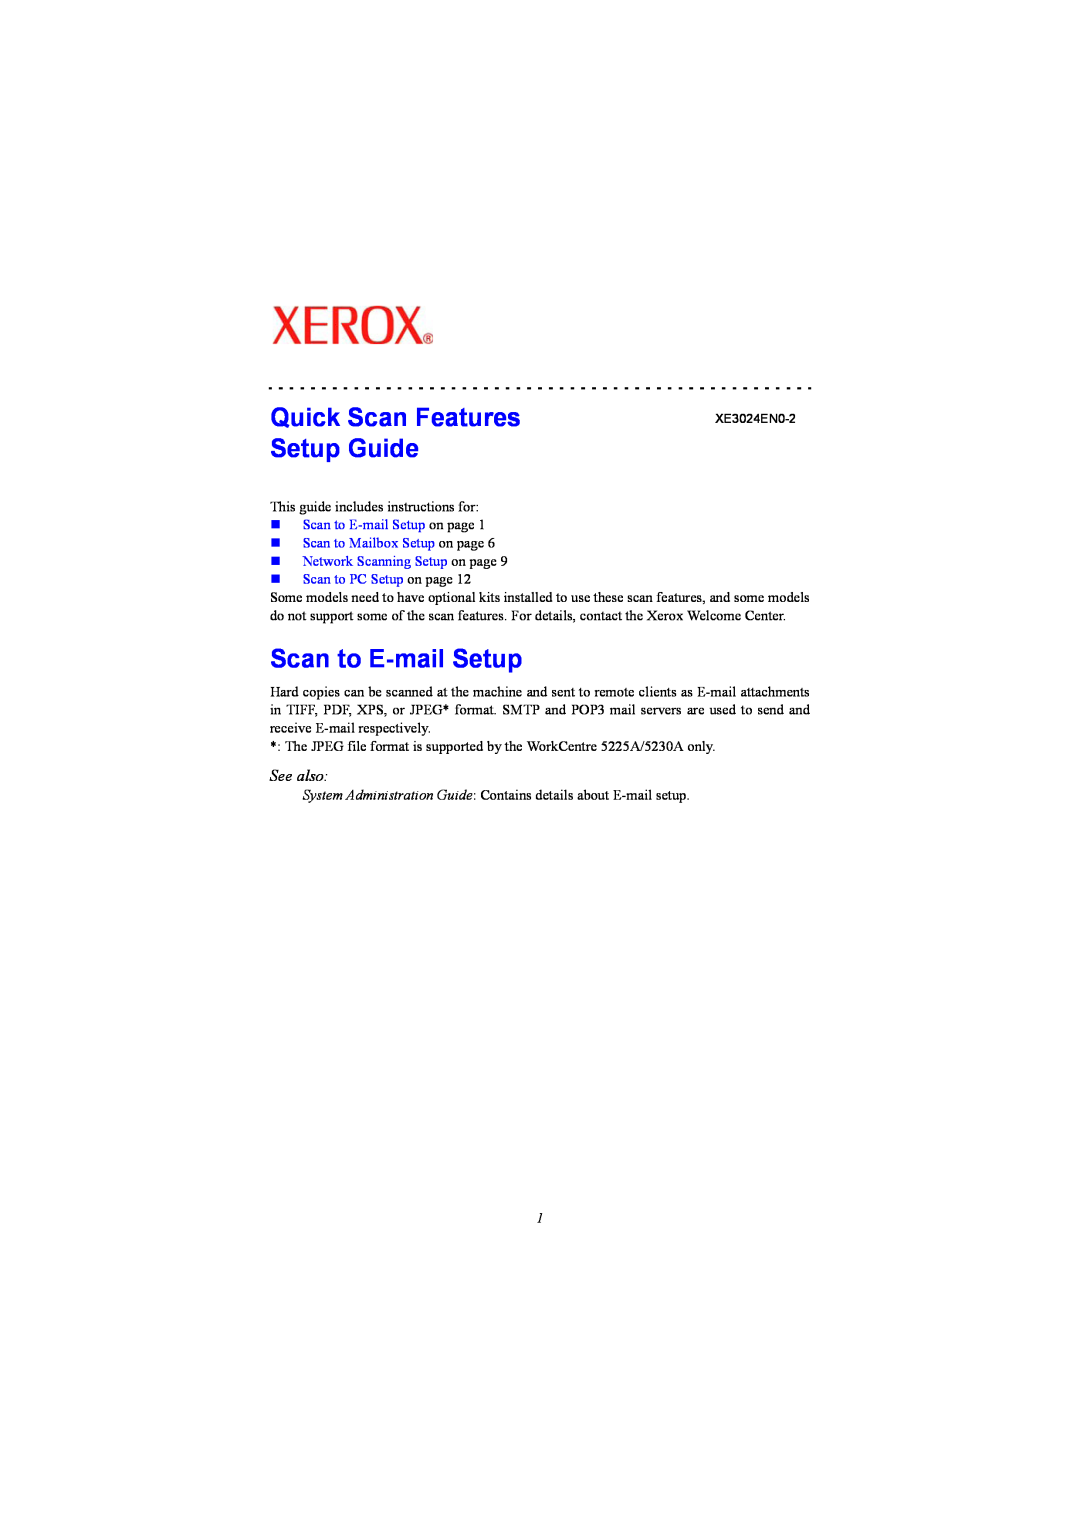 Xerox WC5230 setup guide Quick Scan Features, Setup Guide, See also, „Scan to E-mailSetup on page 